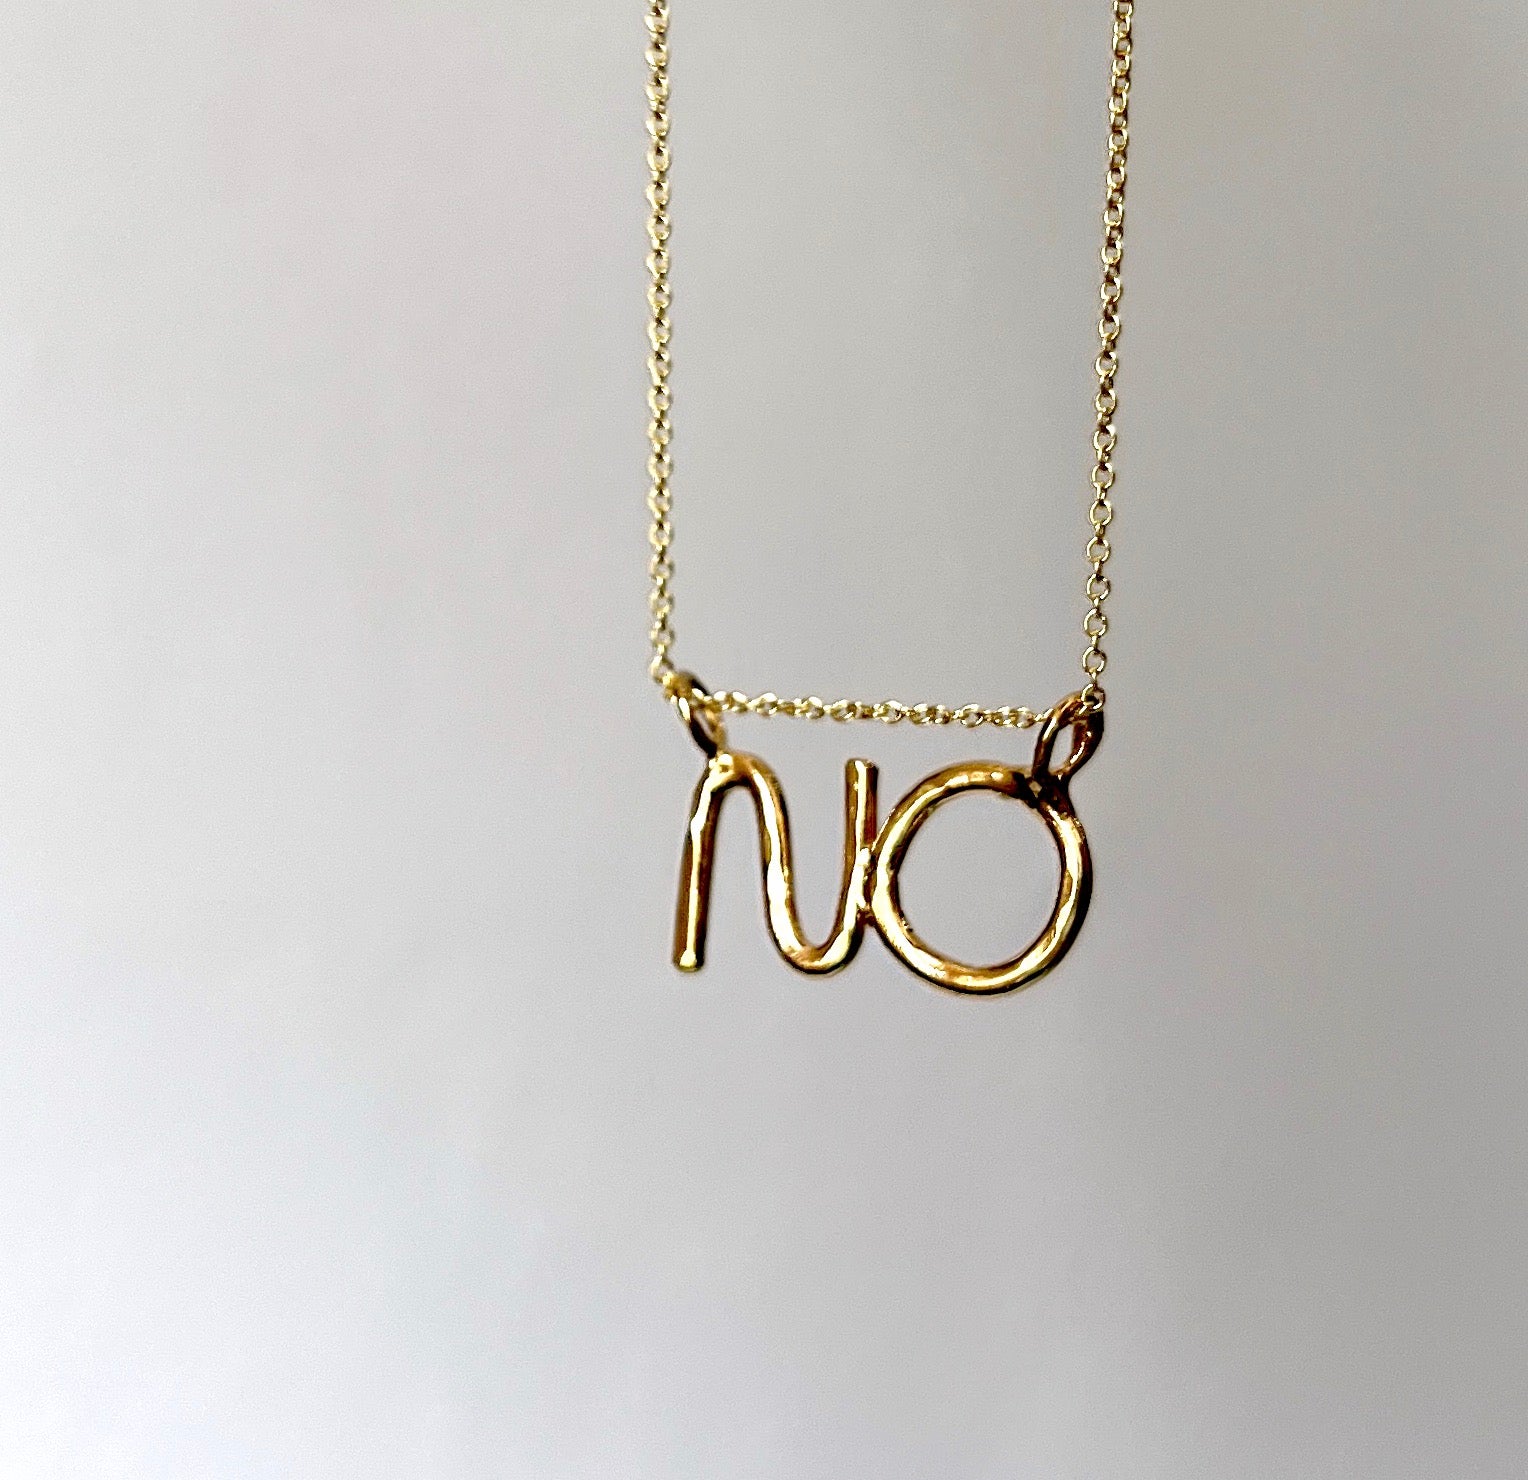 Gold Plated (14K) Brass Chain